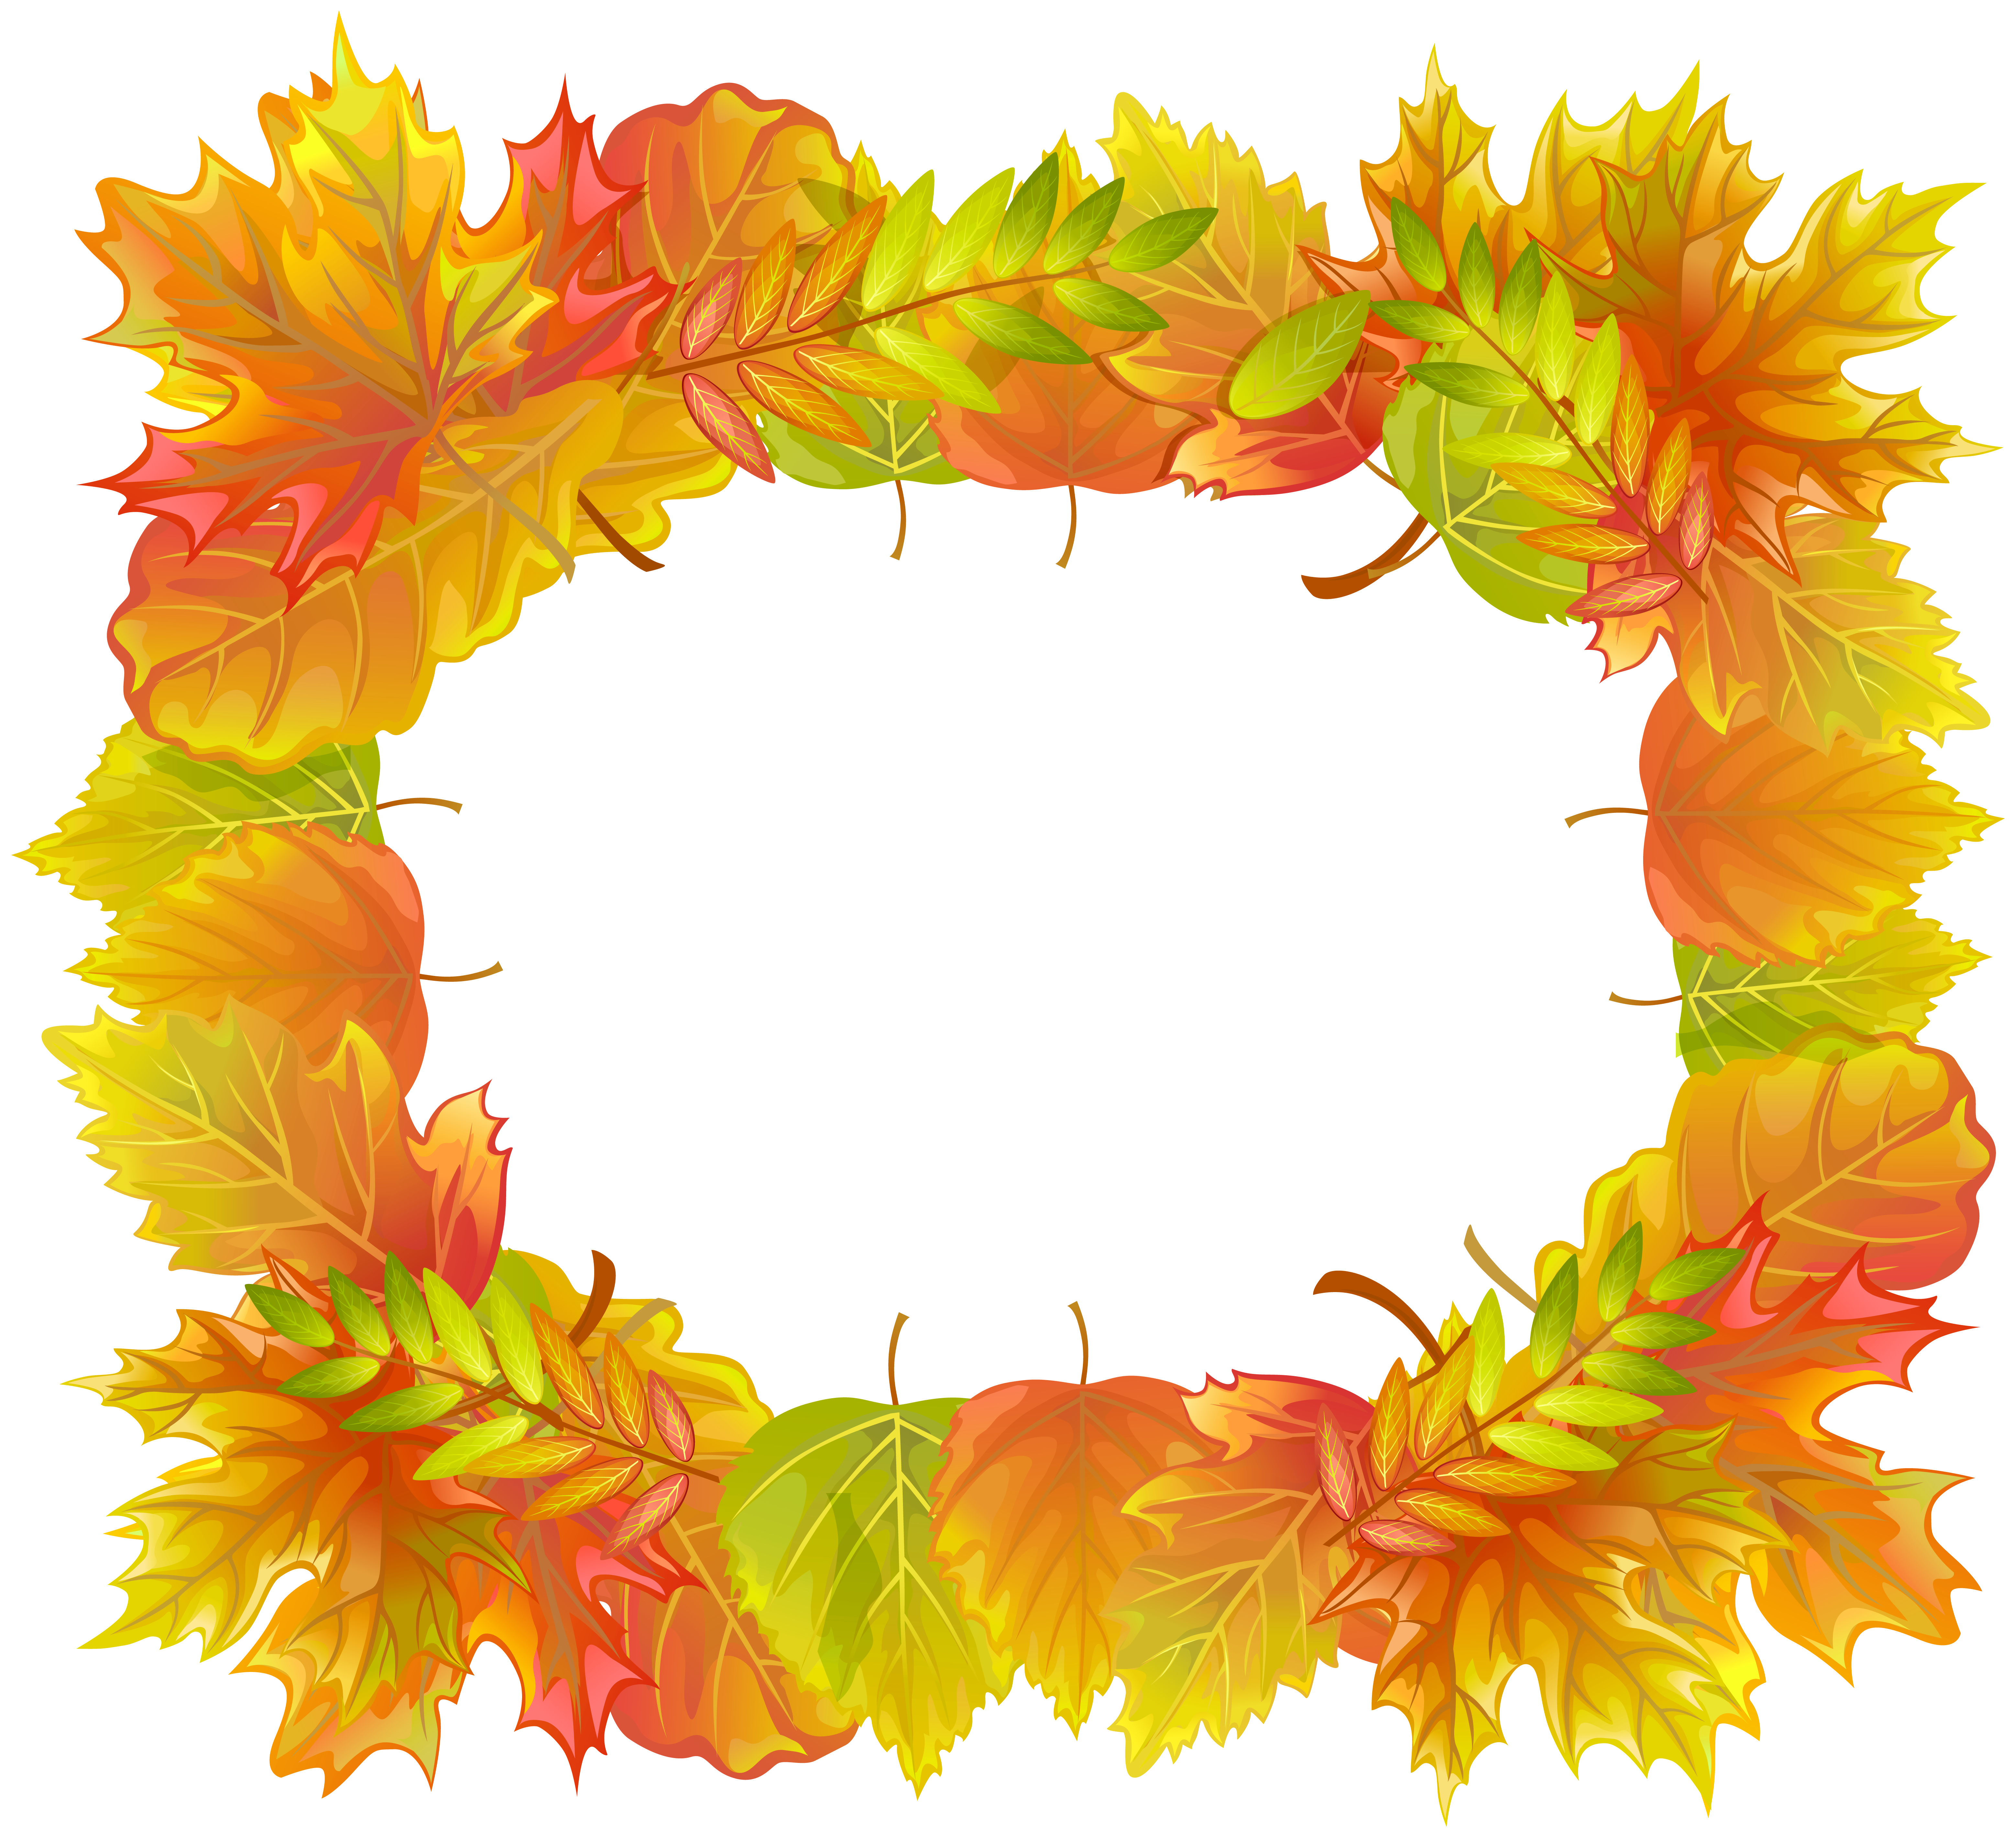 Fall frame png. Autumn leafs border clipart